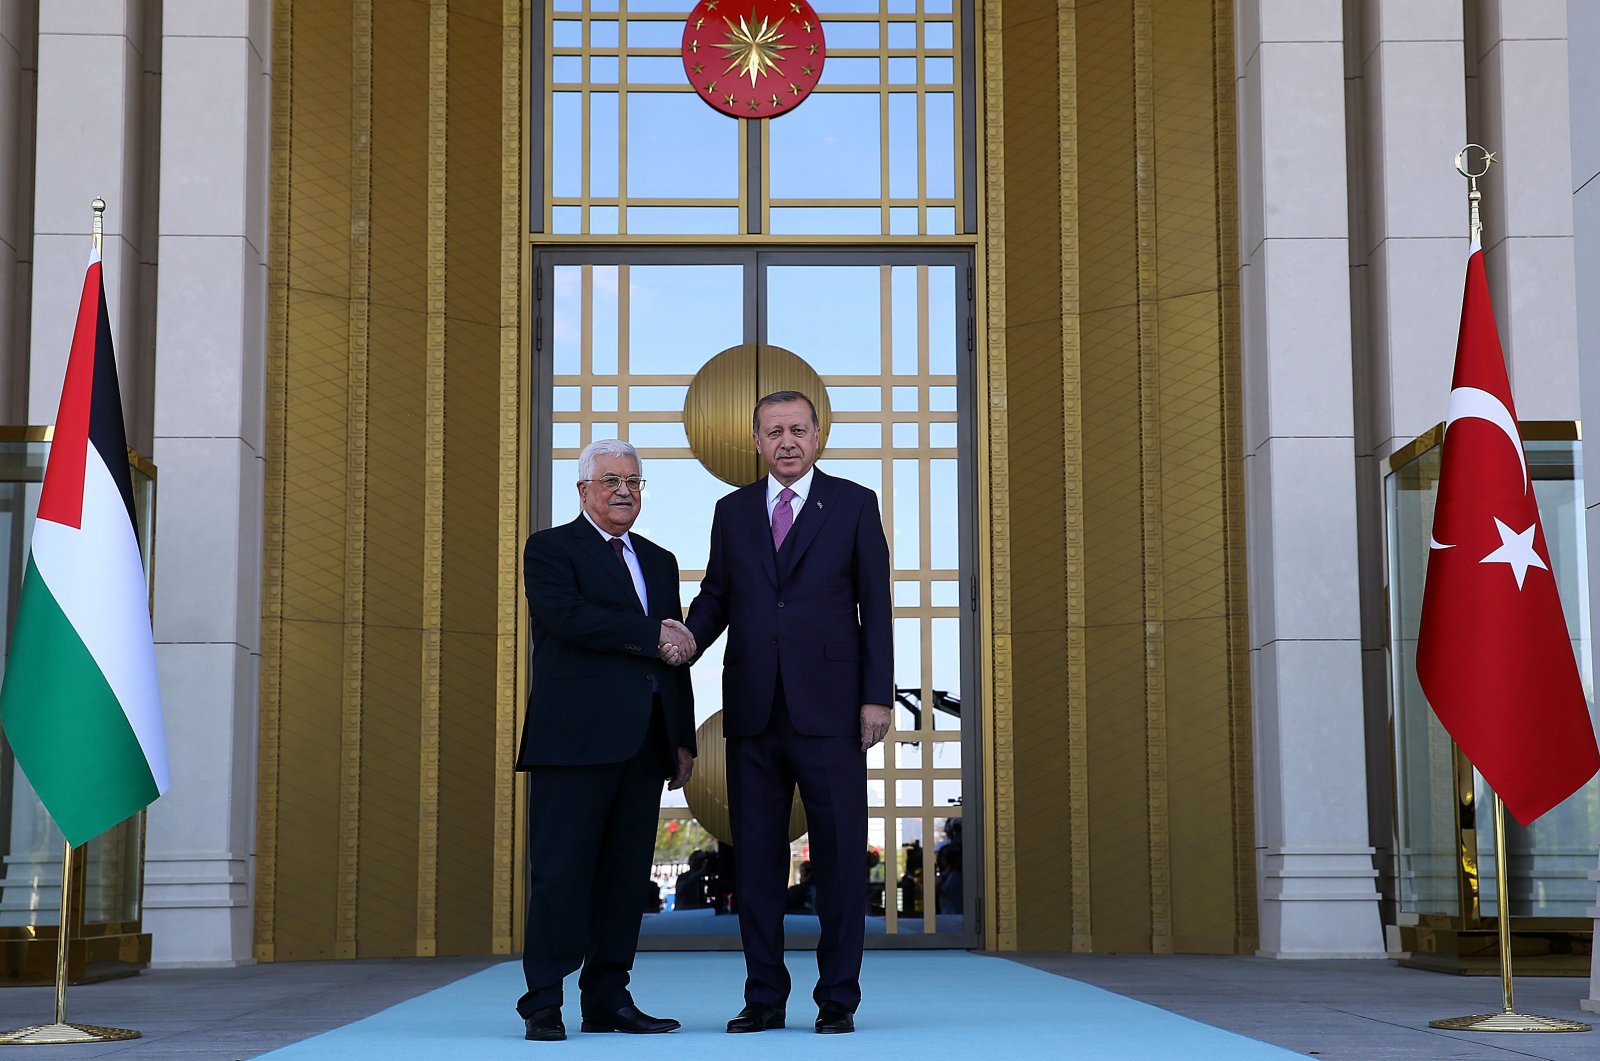 President Recep Tayyip Erdoğan (R) and his Palestinian counterpart Mahmoud Abbas (L) shake hands at the Presidential Complex in Ankara, Aug. 28, 2017. (Sabah File Photo)